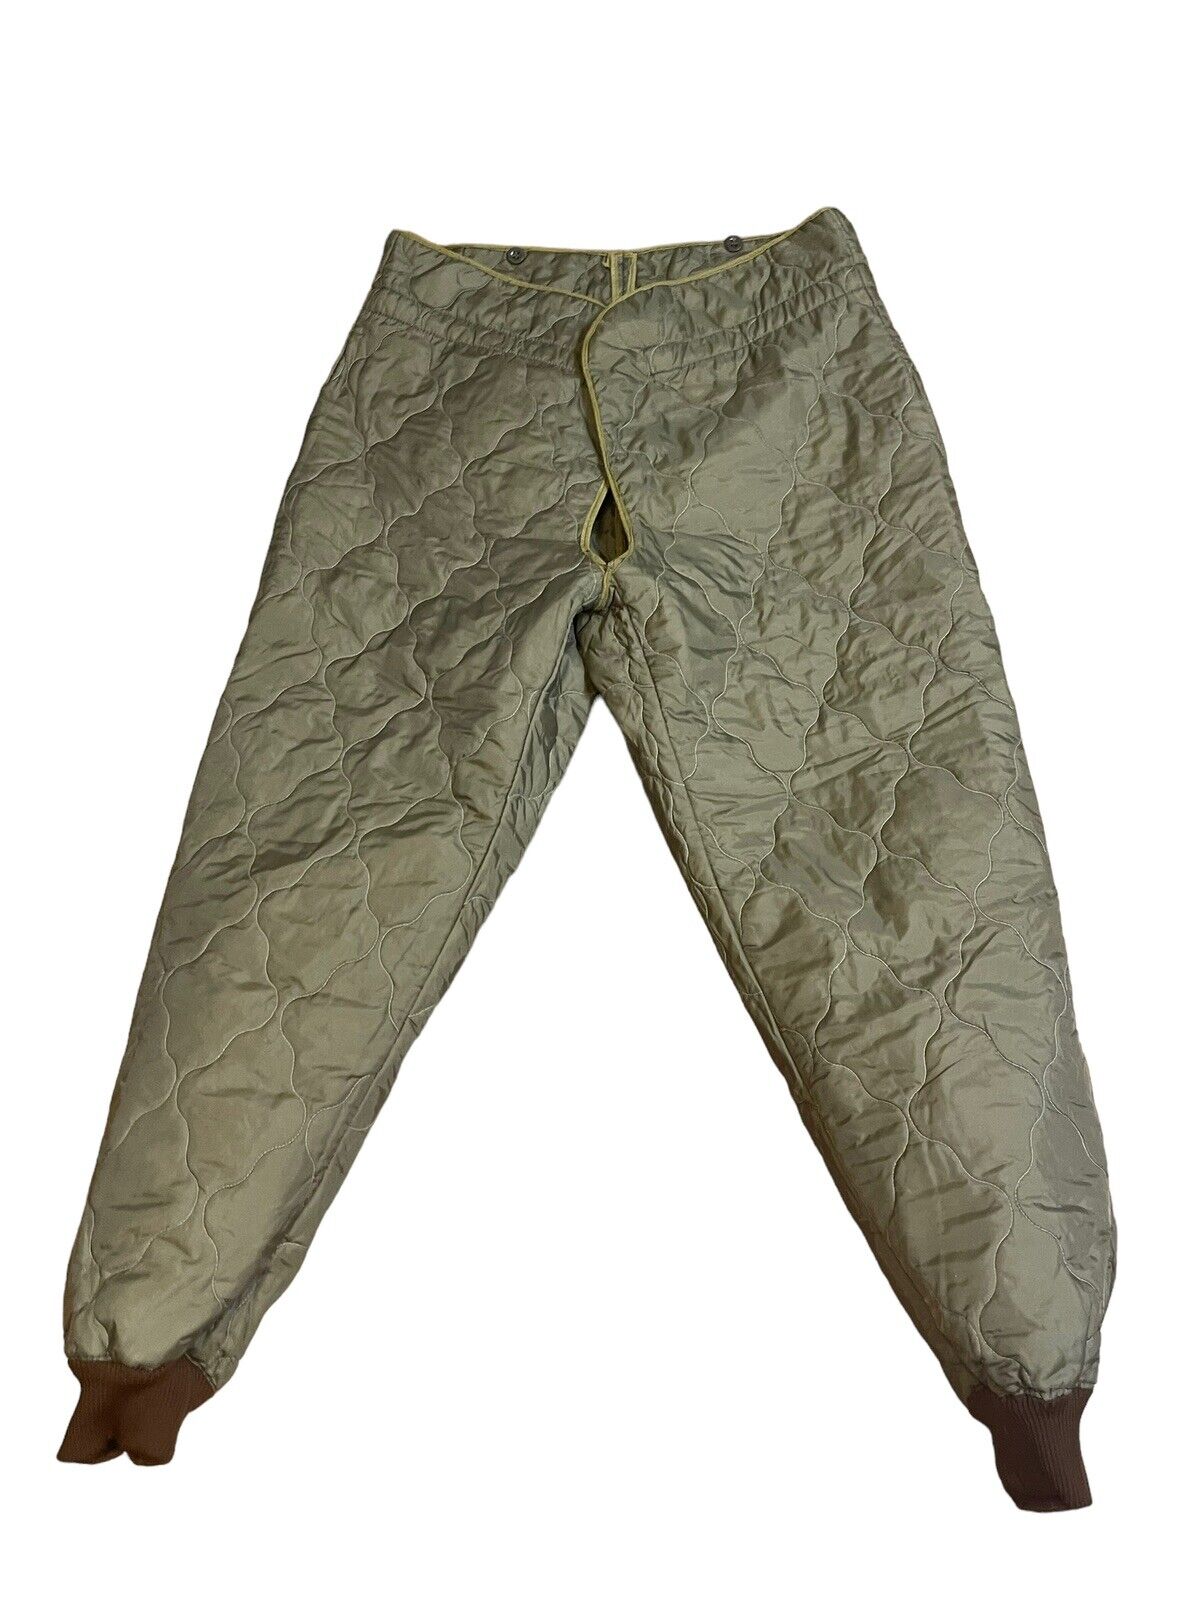 Ozkn Prešov Czech Military Quilted￼ Insulated Pants Liner Gree, Sz See Photos